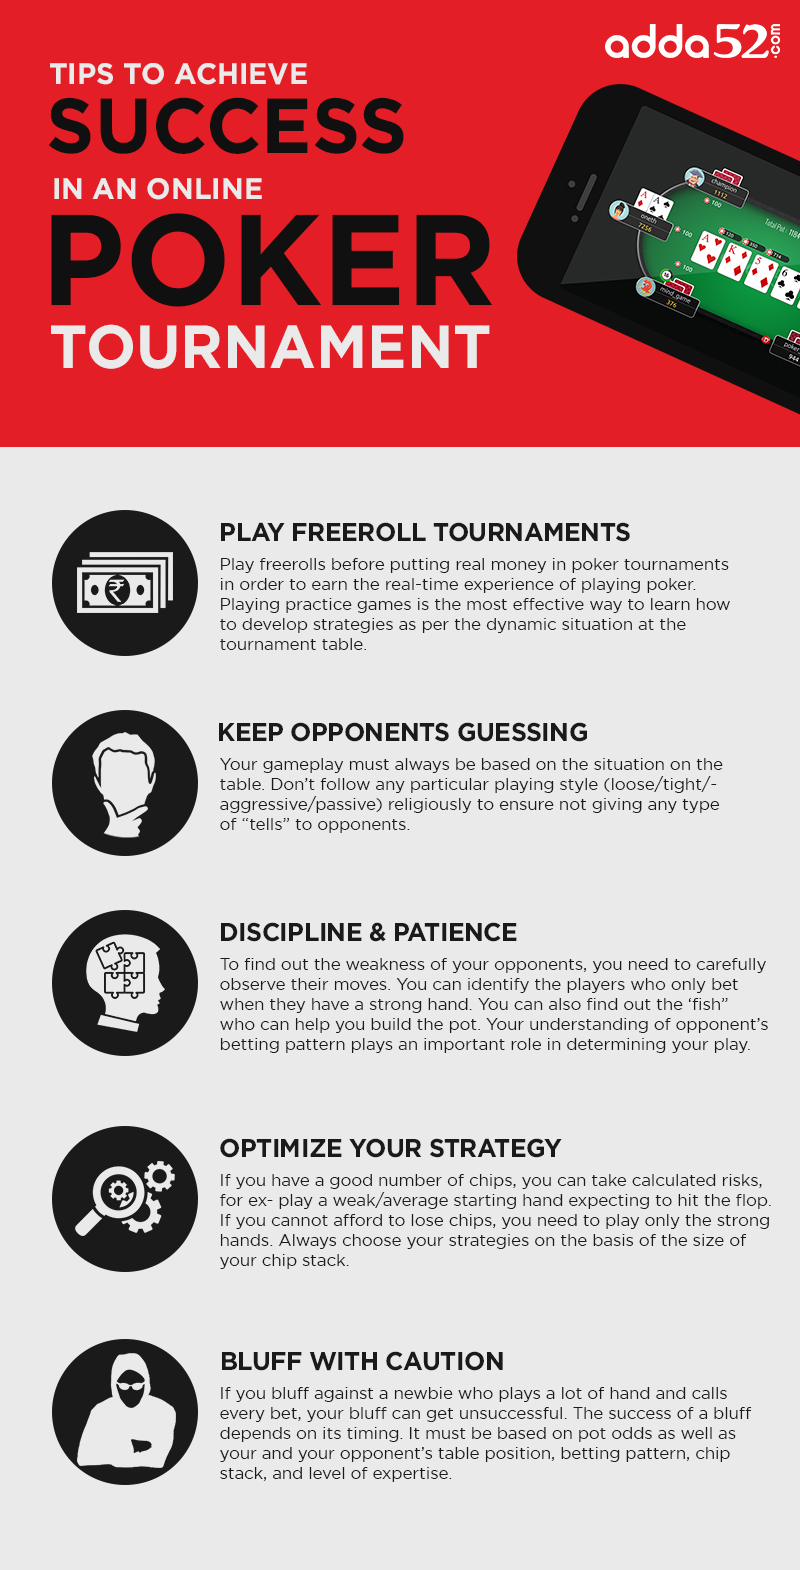 Tips to Achieve Success in an online poker tournament